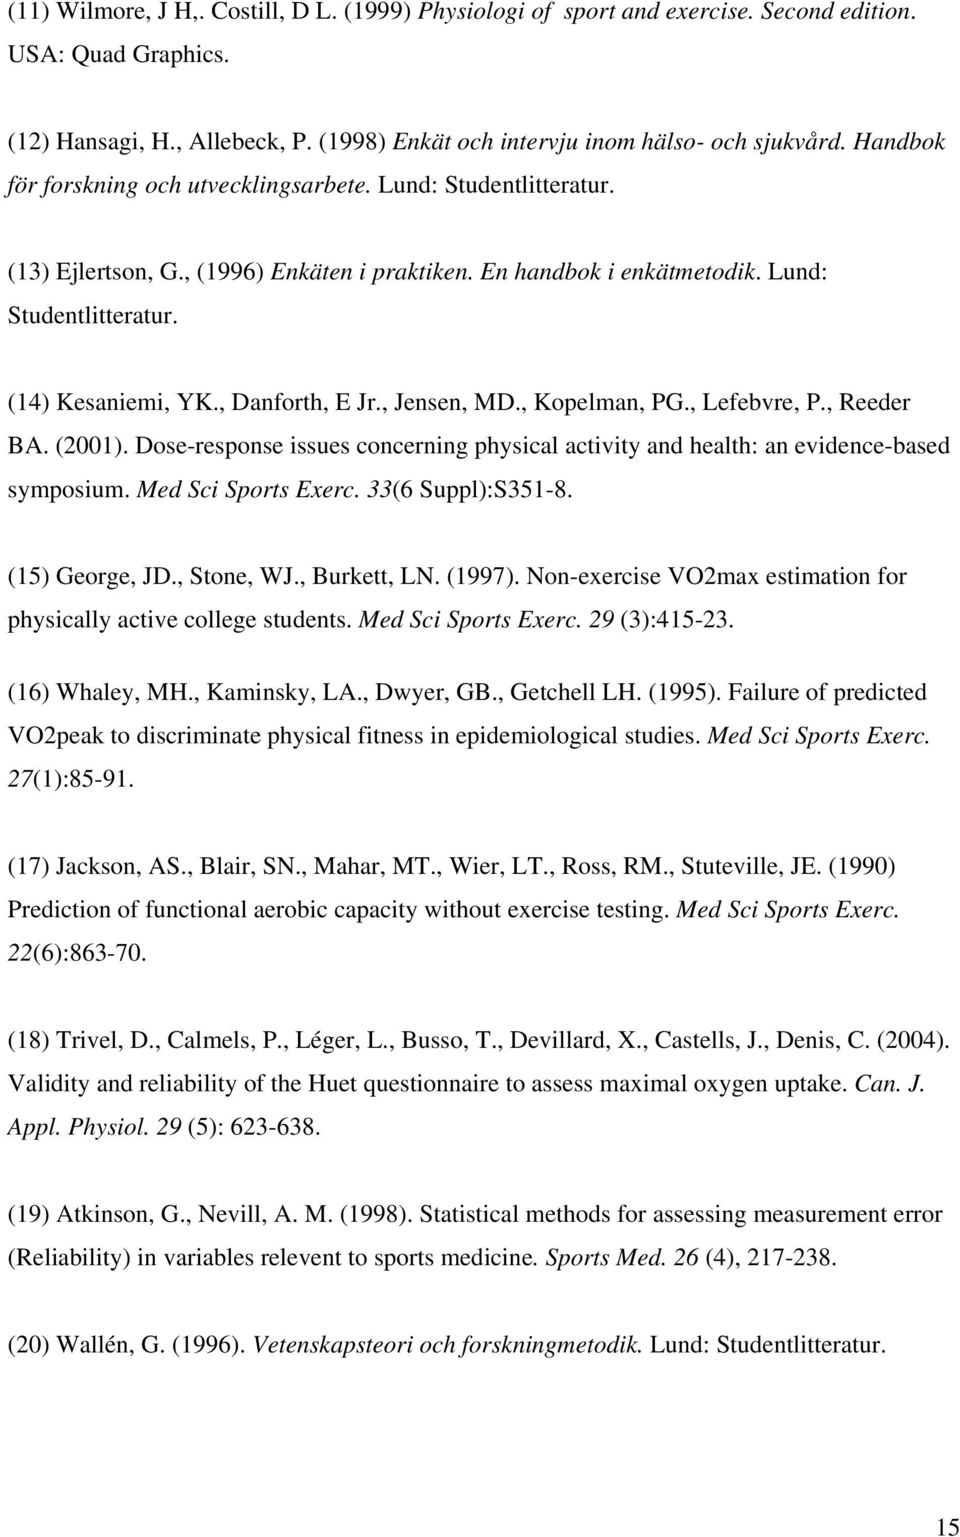 , Danforth, E Jr., Jensen, MD., Kopelman, PG., Lefebvre, P., Reeder BA. (2001). Dose-response issues concerning physical activity and health: an evidence-based symposium. Med Sci Sports Exerc.